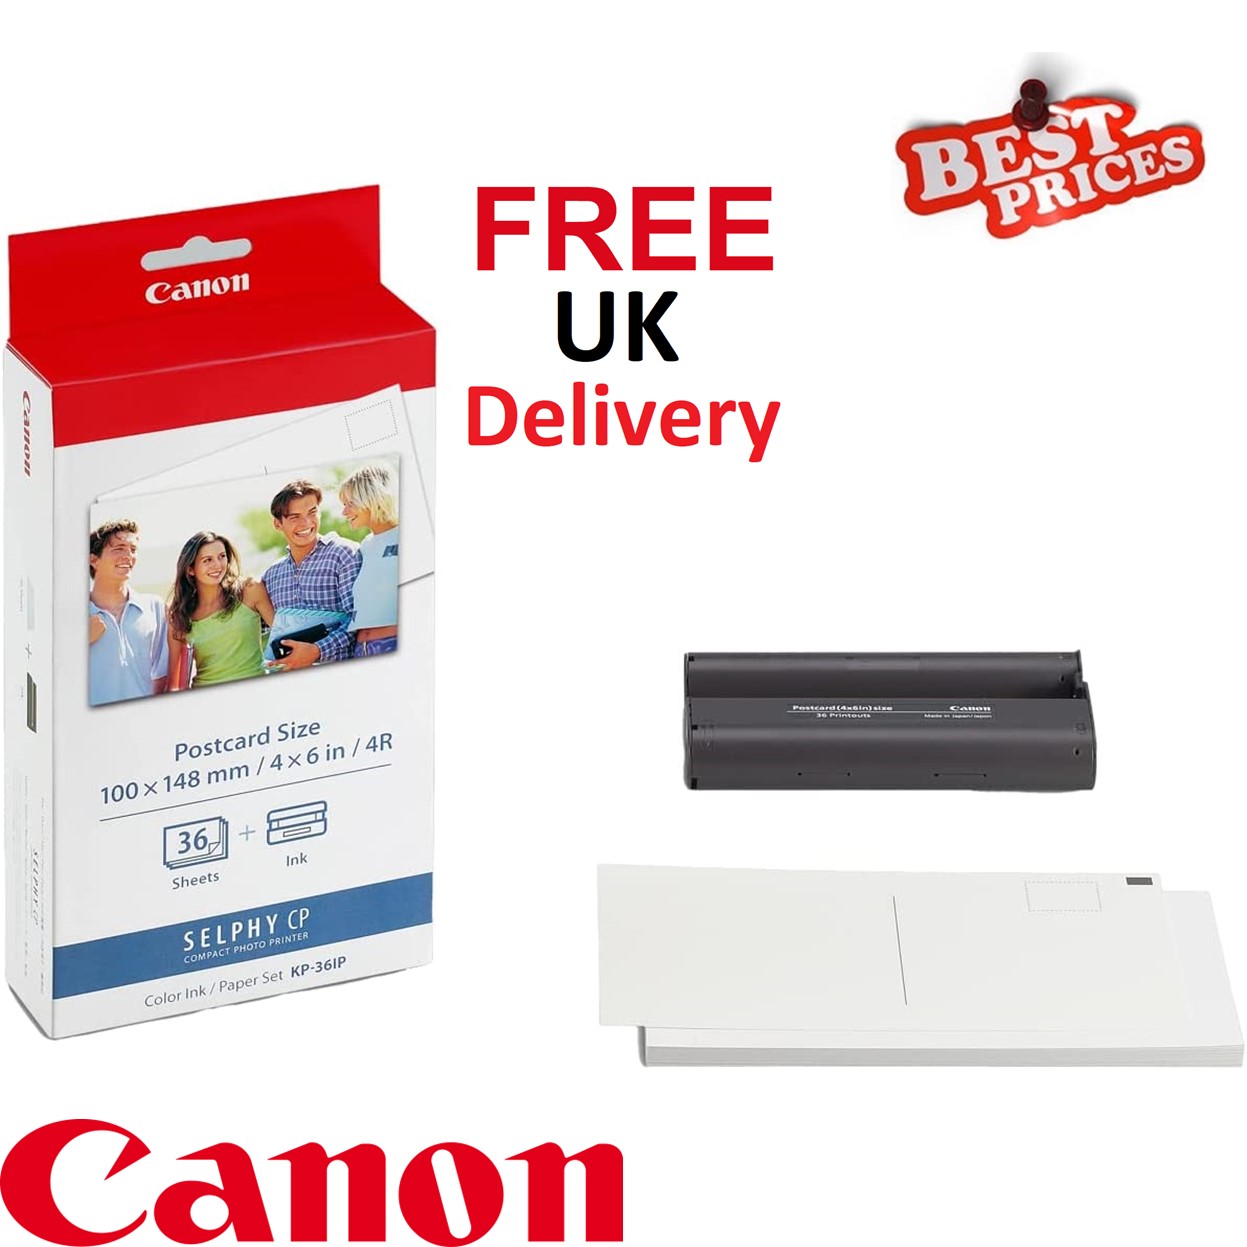 Canon KP-36IP Ink/Paper for Selphy CP Printers 36x 4x6 Postcard